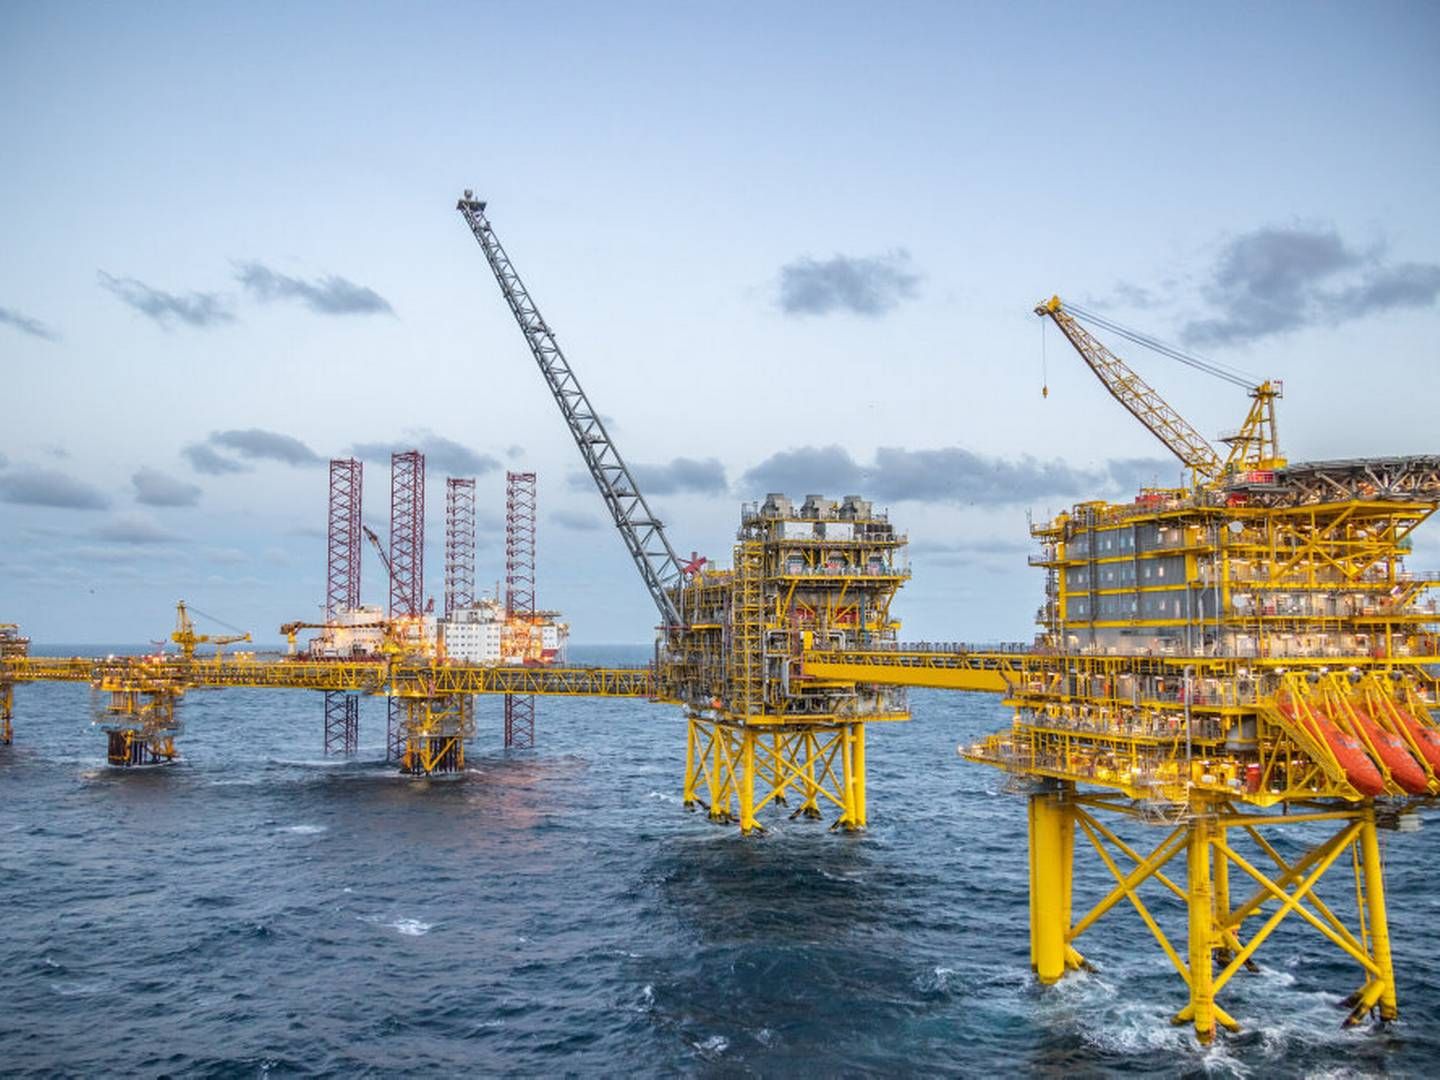 The connection of the Tyra field is one of the reasons why the gas supply in Denmark looks stable. | Photo: Totalenergies/pr